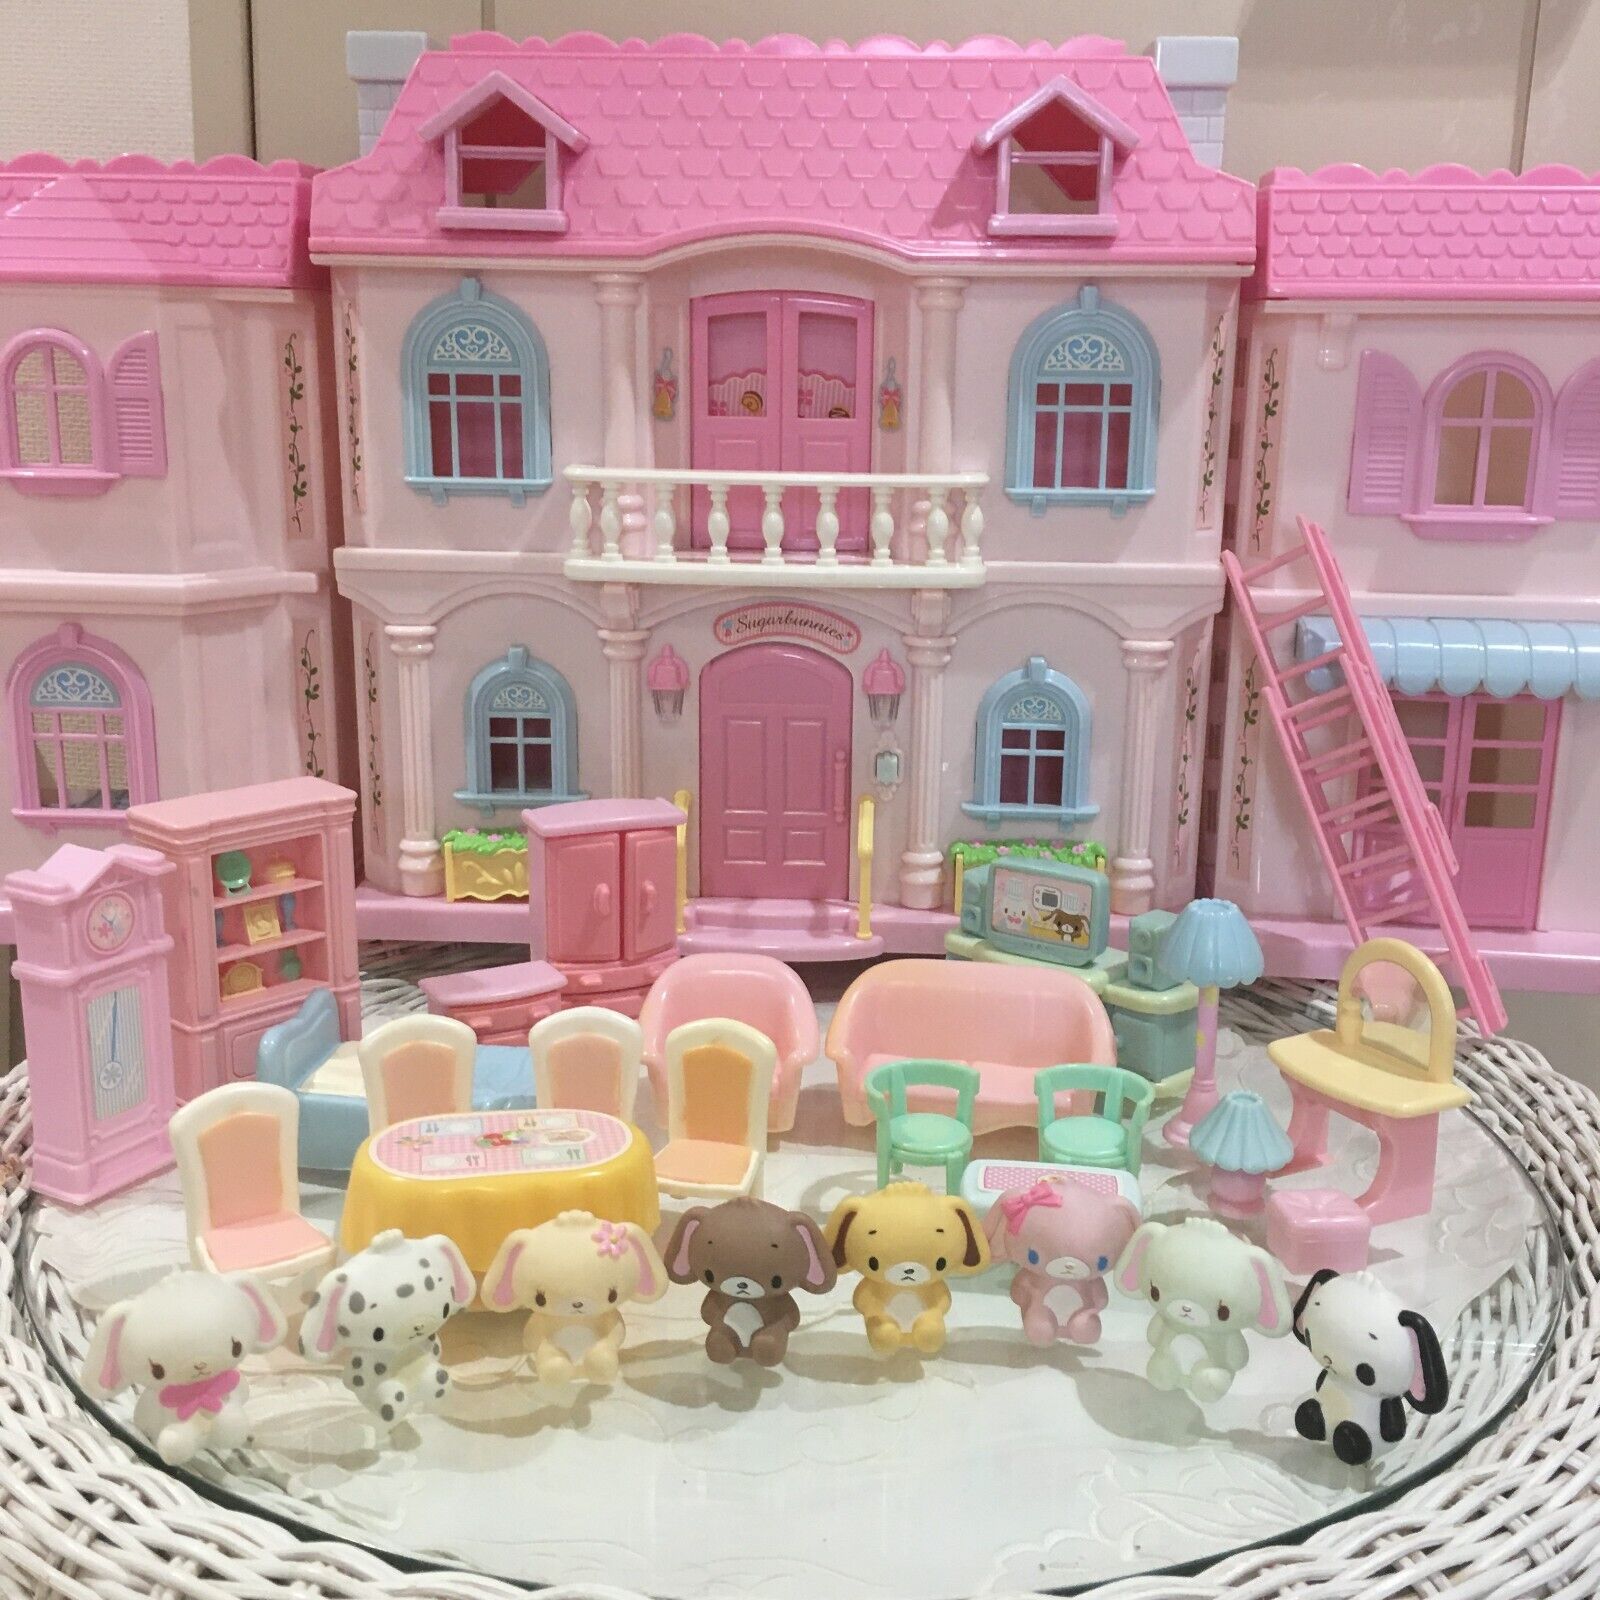 Sanrio Sugarbunnies  Dollhouse pink roof door Junk The bell doesn't ring